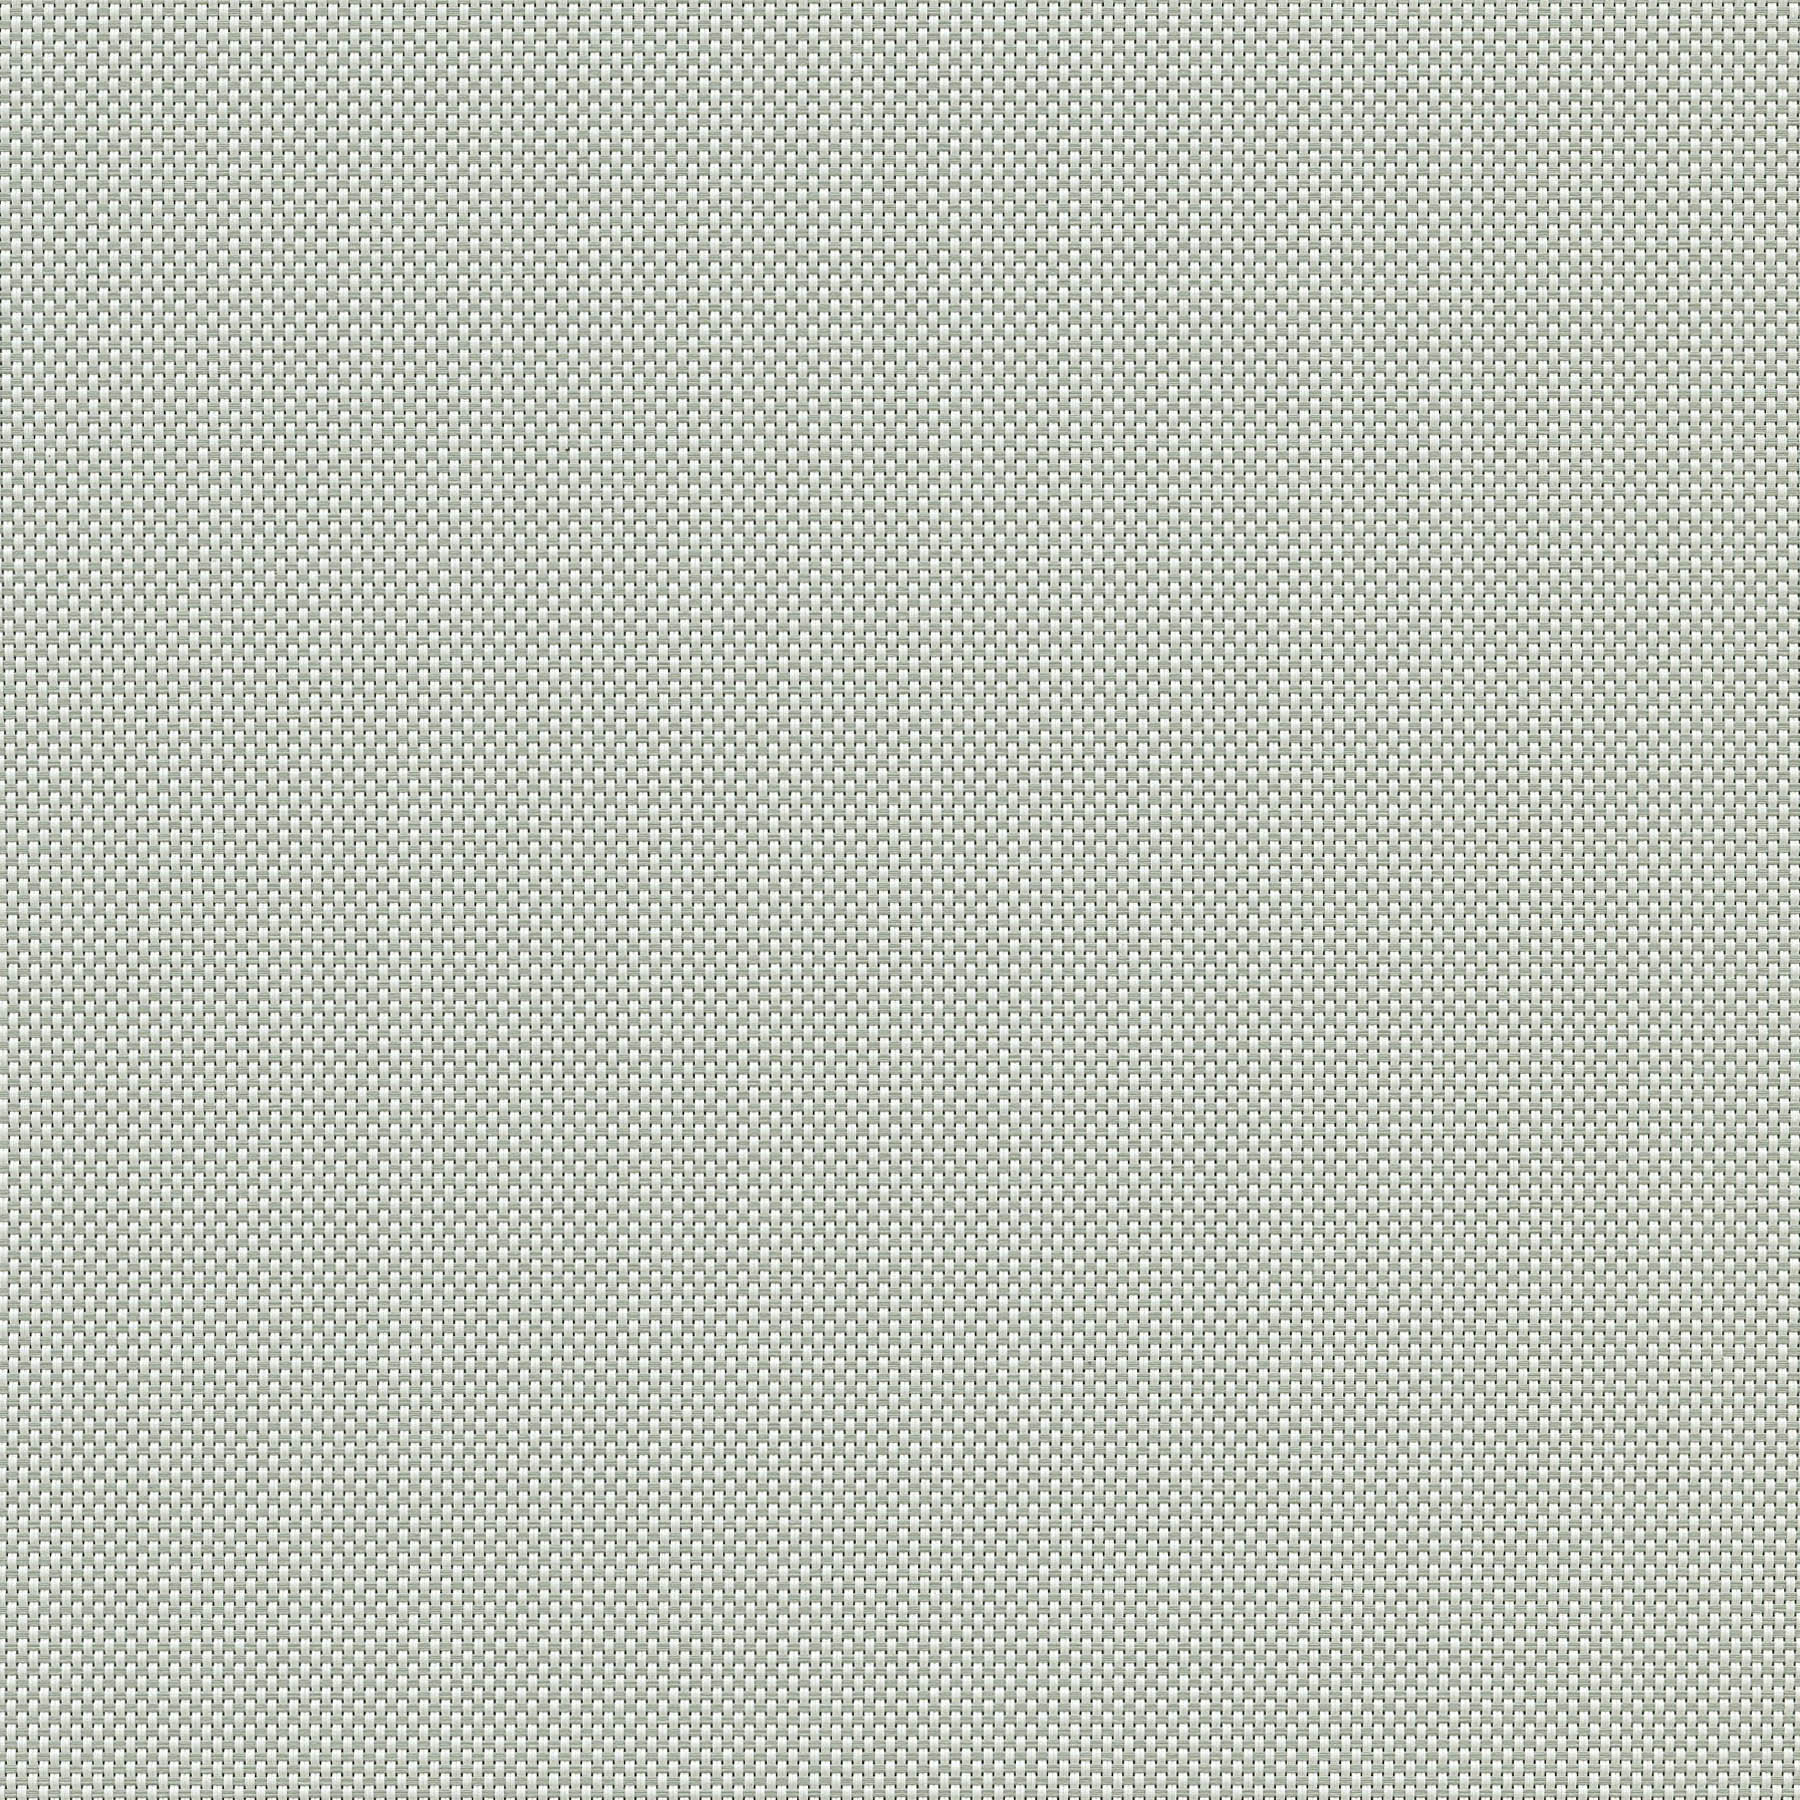 Altex - Fabric - SHEERWEAVE 2390 - Oyster-Pearl Grey - 39P14